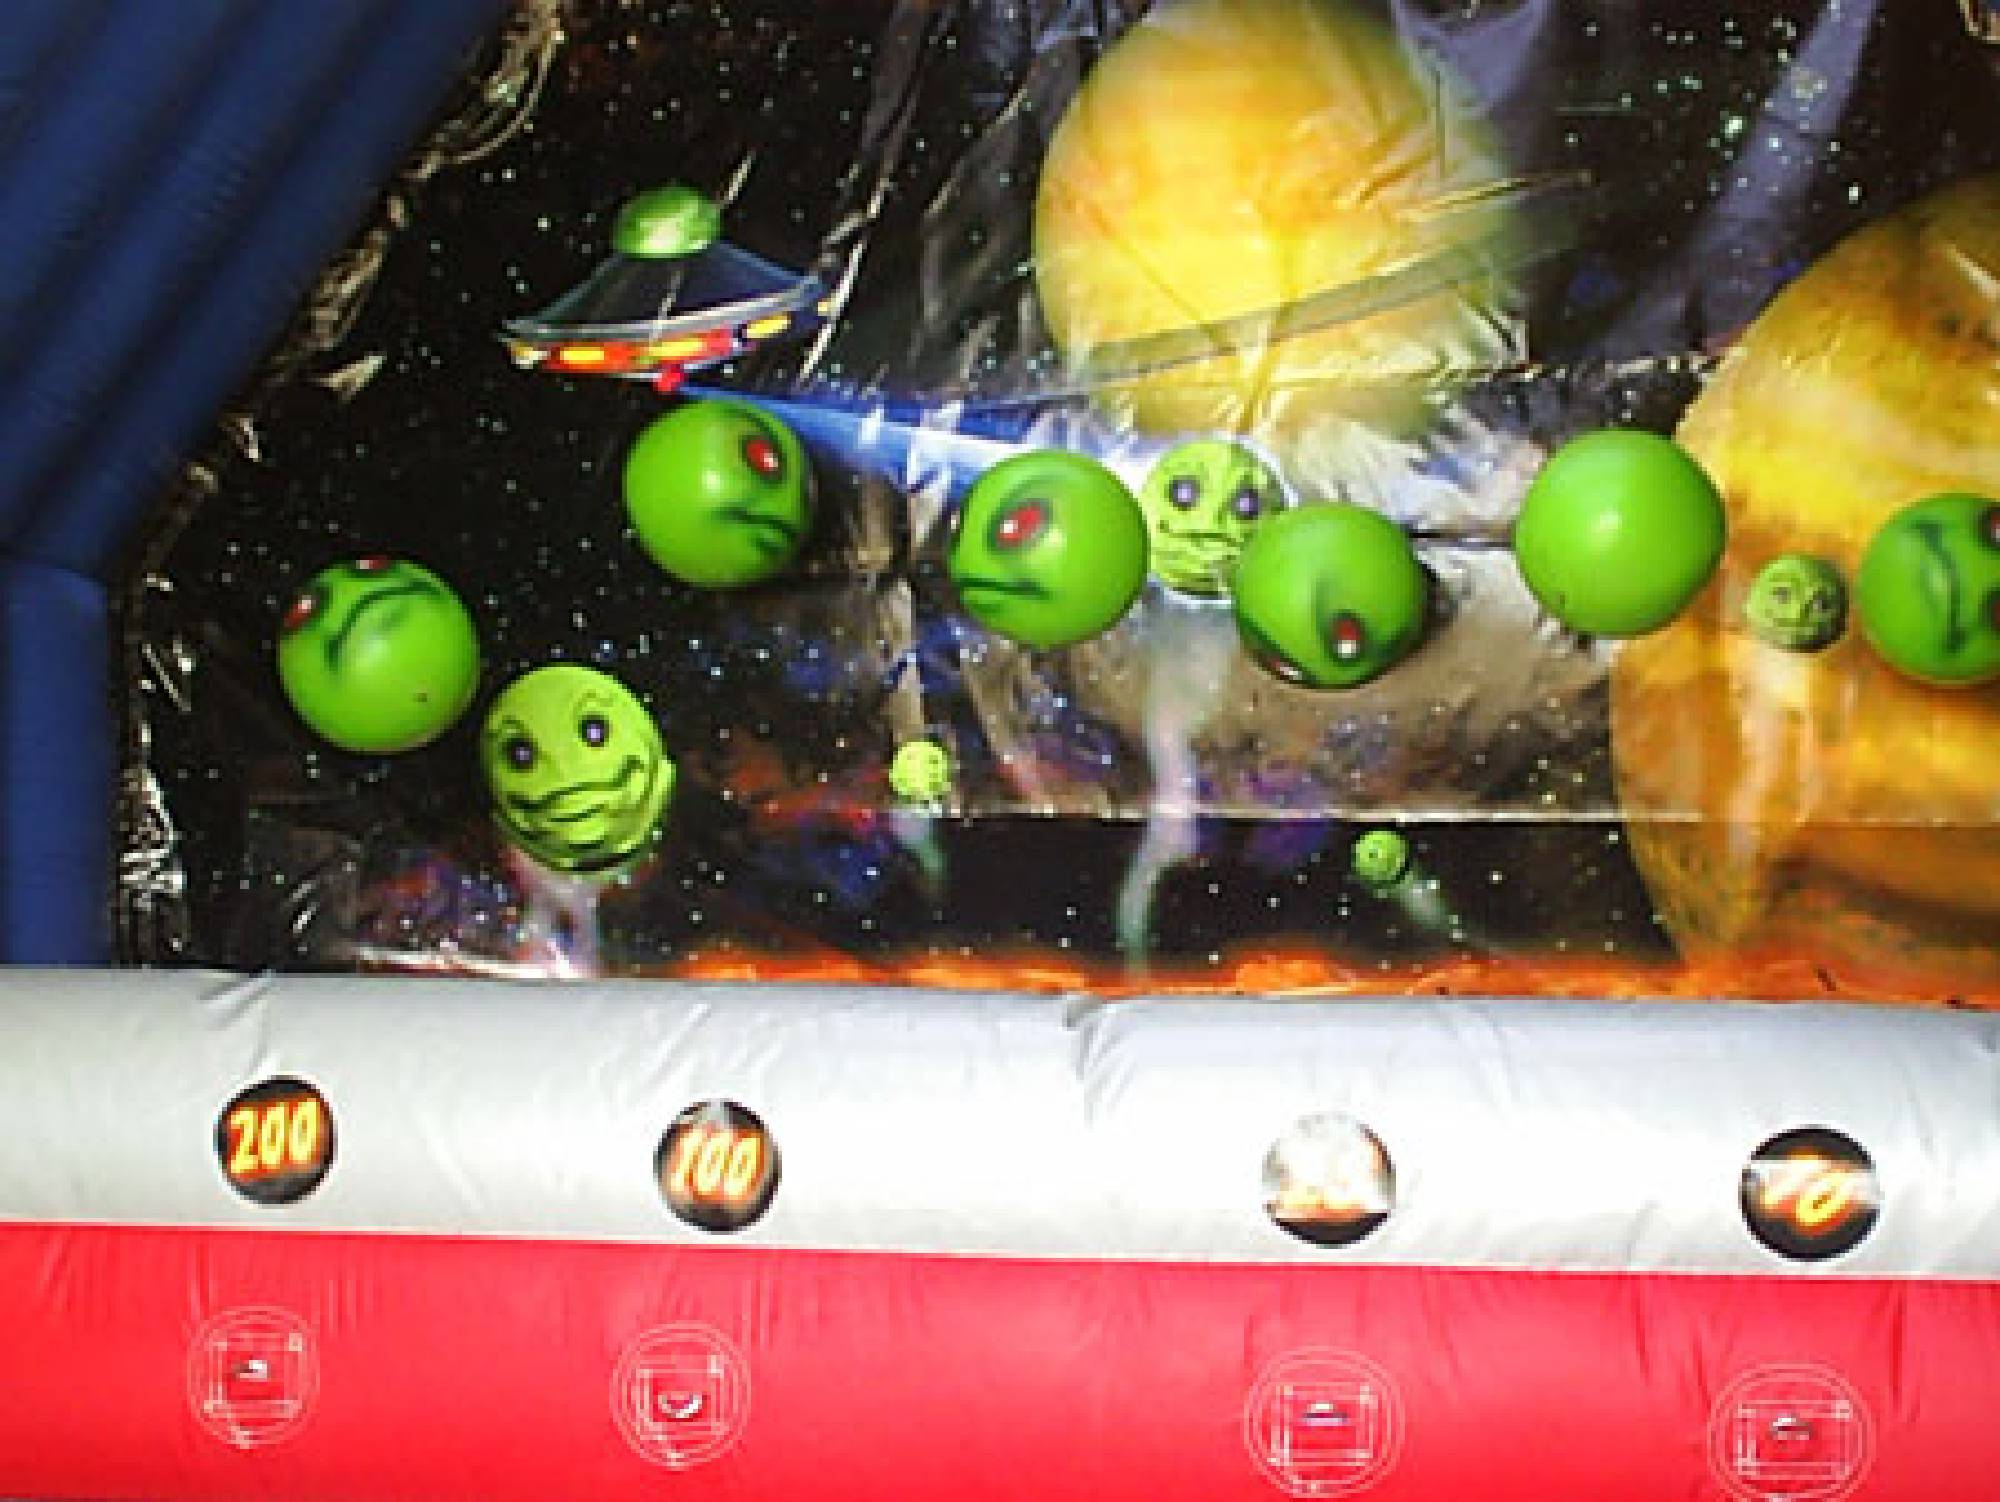 The floating Martian heads wait to be knocked down on the Zero Gravity rental game